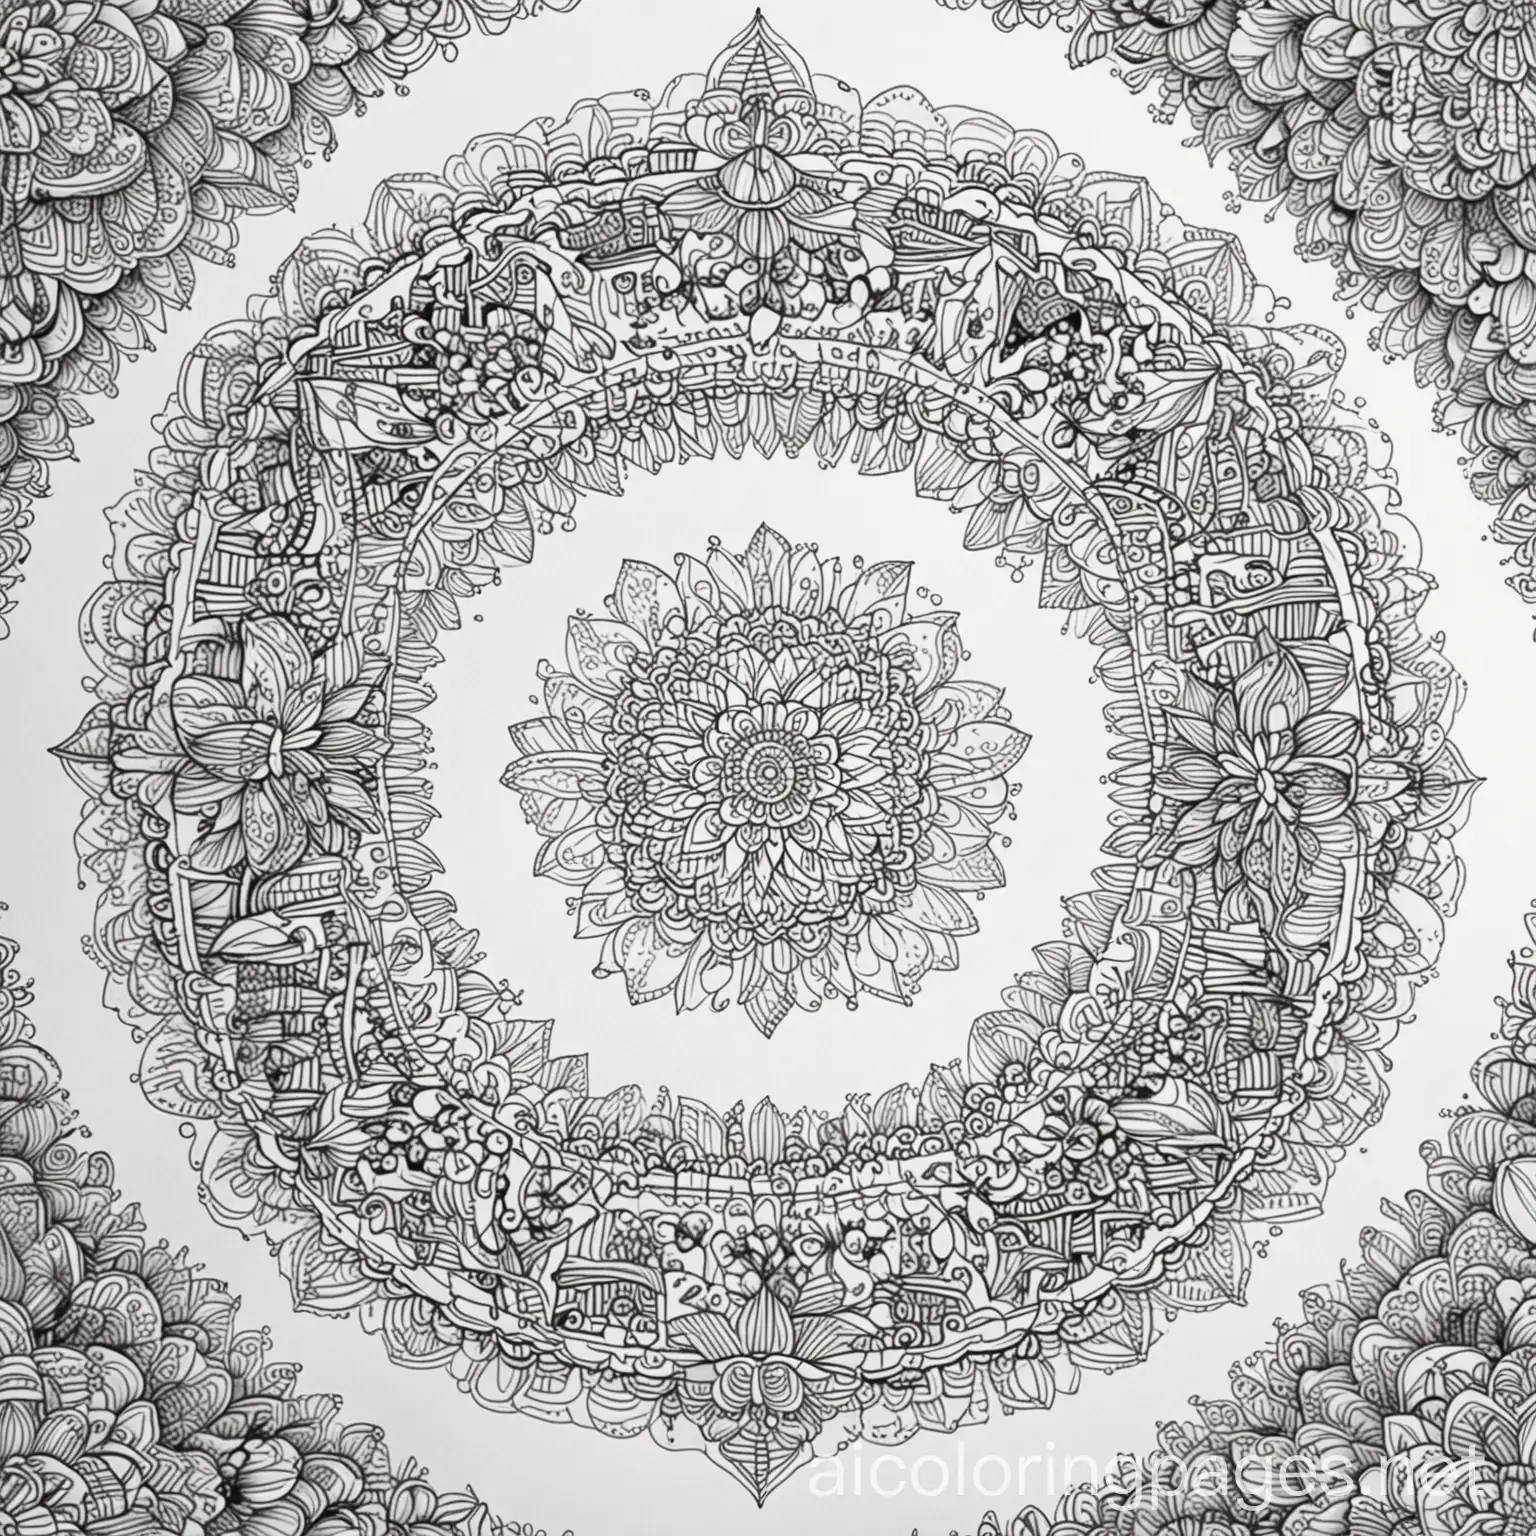 Zen  doodles inside of a mandala garden coloring page, Coloring Page, black and white, line art, white background, Simplicity, Ample White Space. The background of the coloring page is plain white to make it easy for young children to color within the lines. The outlines of all the subjects are easy to distinguish, making it simple for kids to color without too much difficulty